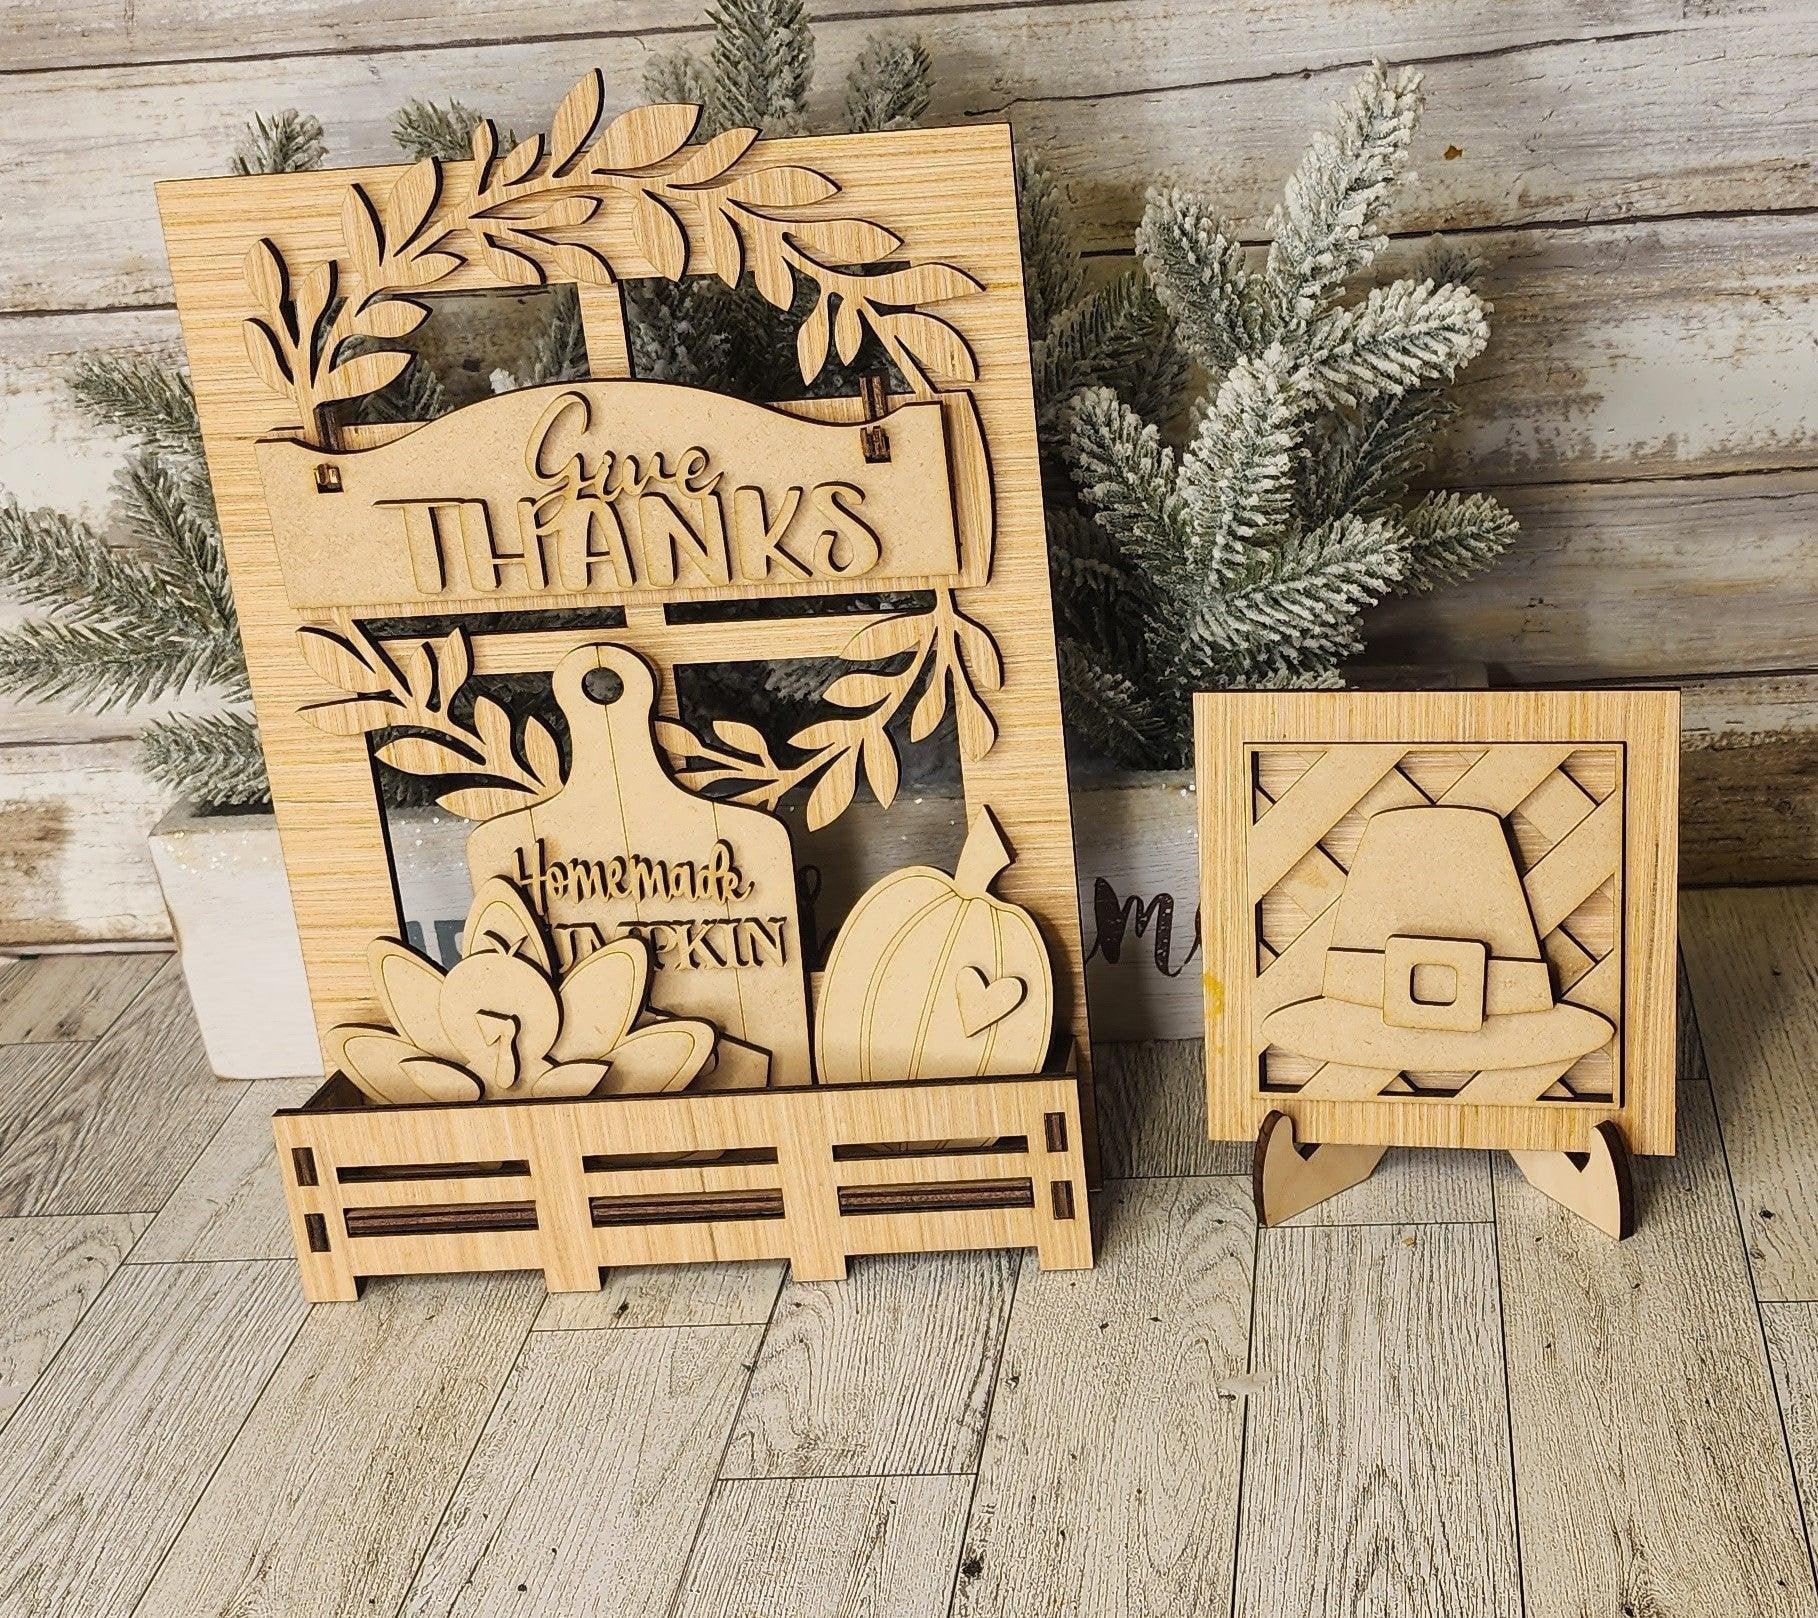 Give Thanks Interchangeable Inserts, Give Thanks DIY inserts, Tive Thanks Fall Insert for Window or House - RusticFarmhouseDecor